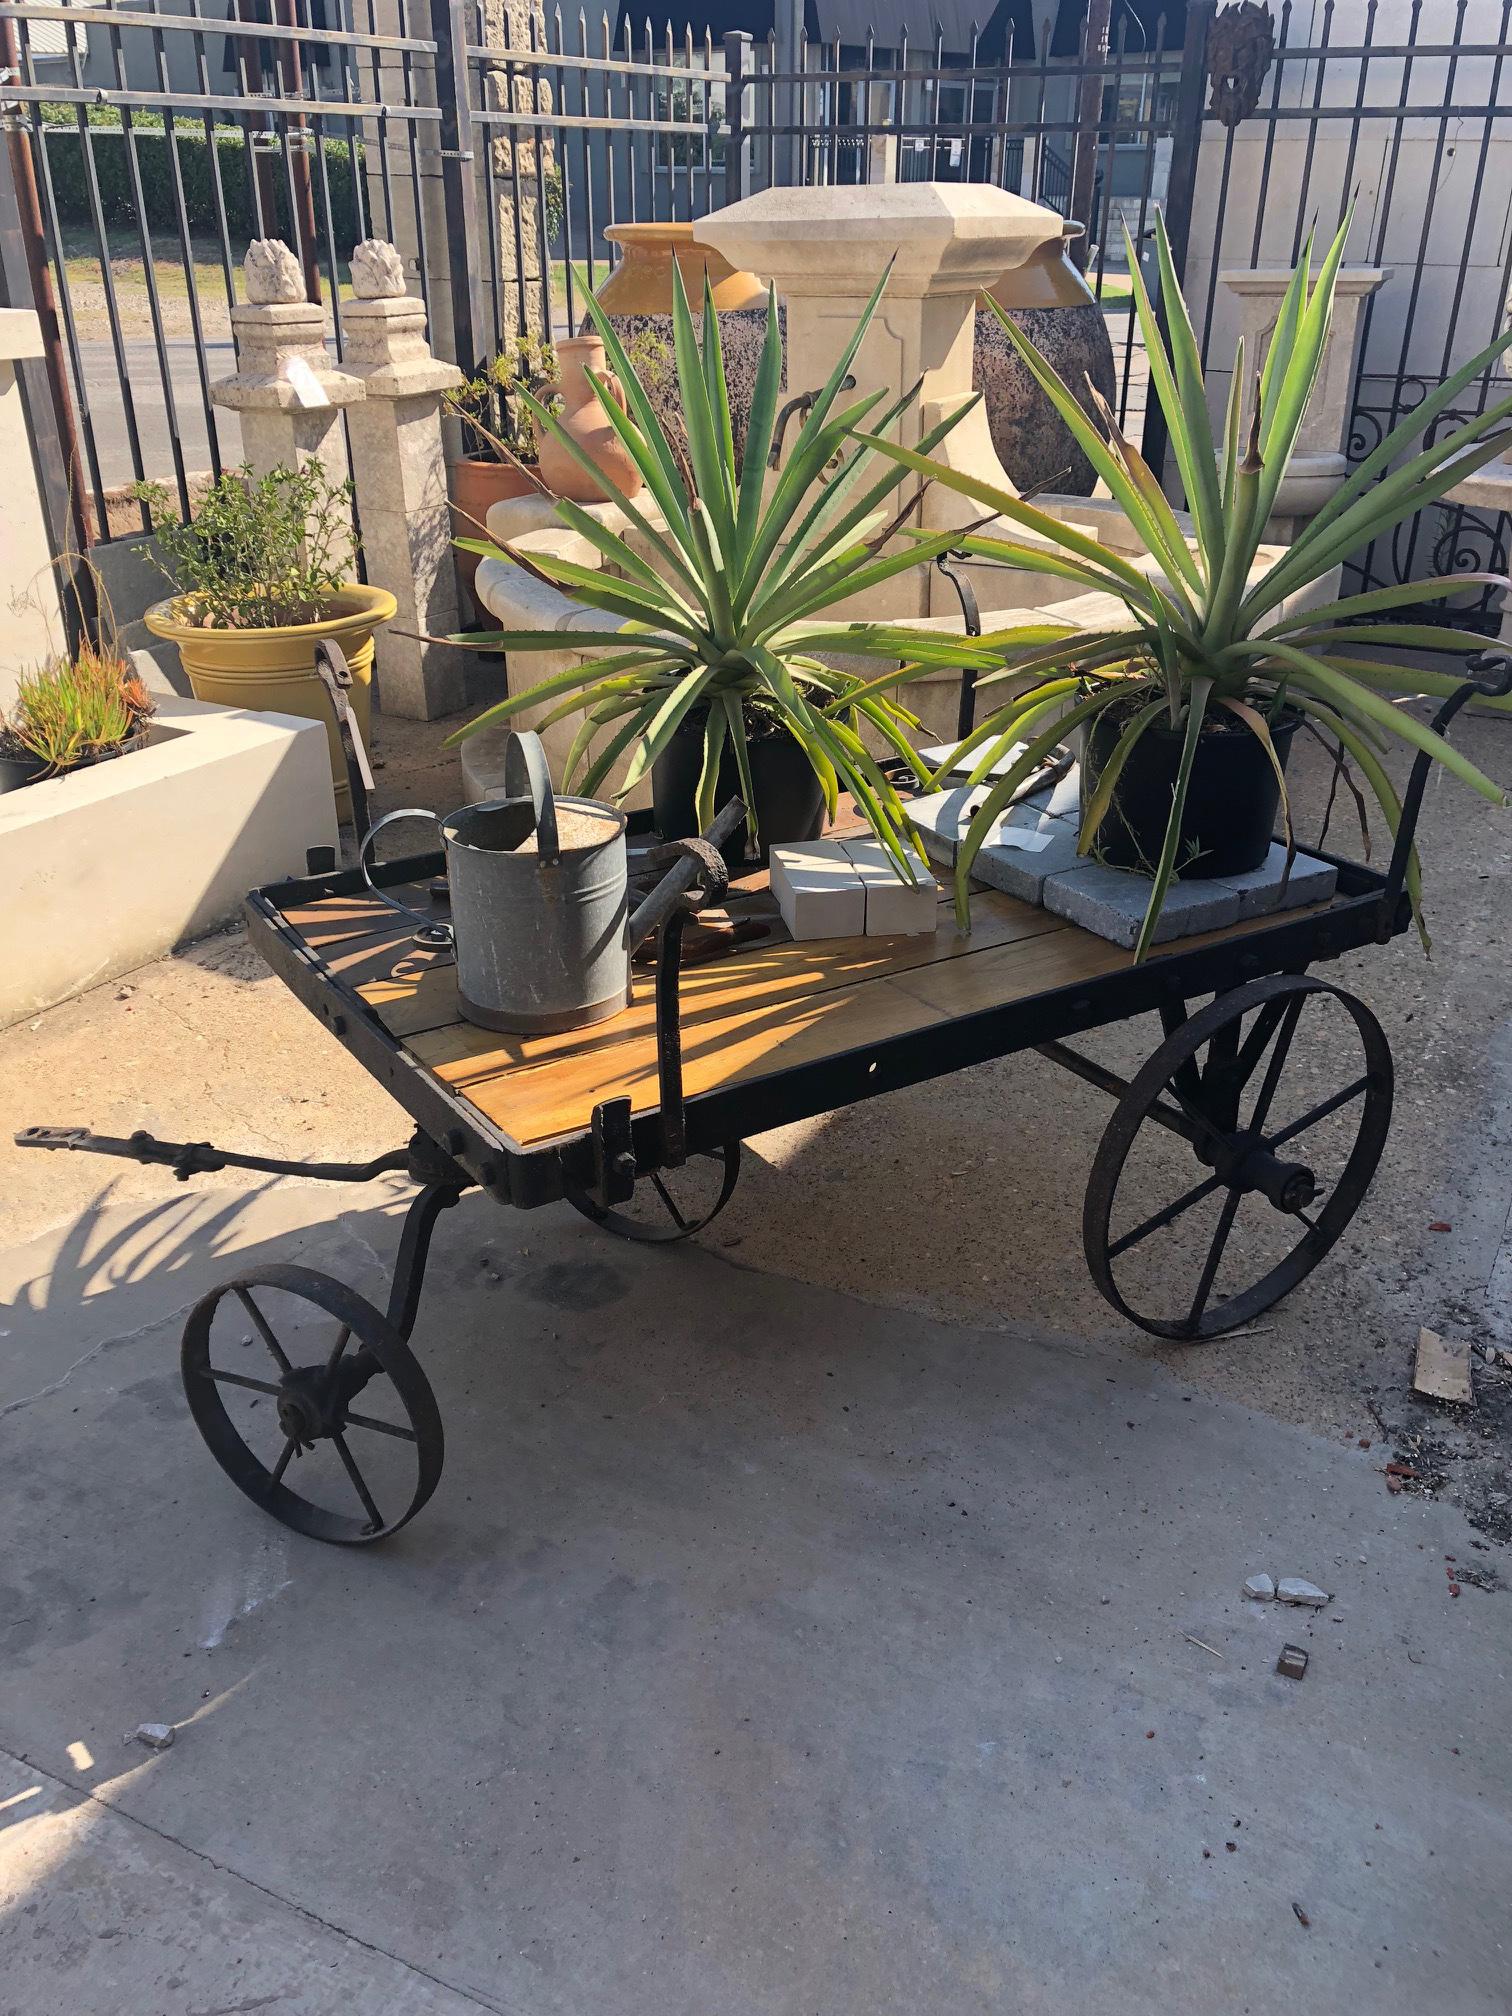 Showcase flowers and plants and create sensational seasonal displays with our rustic, antique, garden wagon. Crafted from wood with rolling iron wheels, this is sure to be a charming addition to your garden or patio.

Dimensions:
24